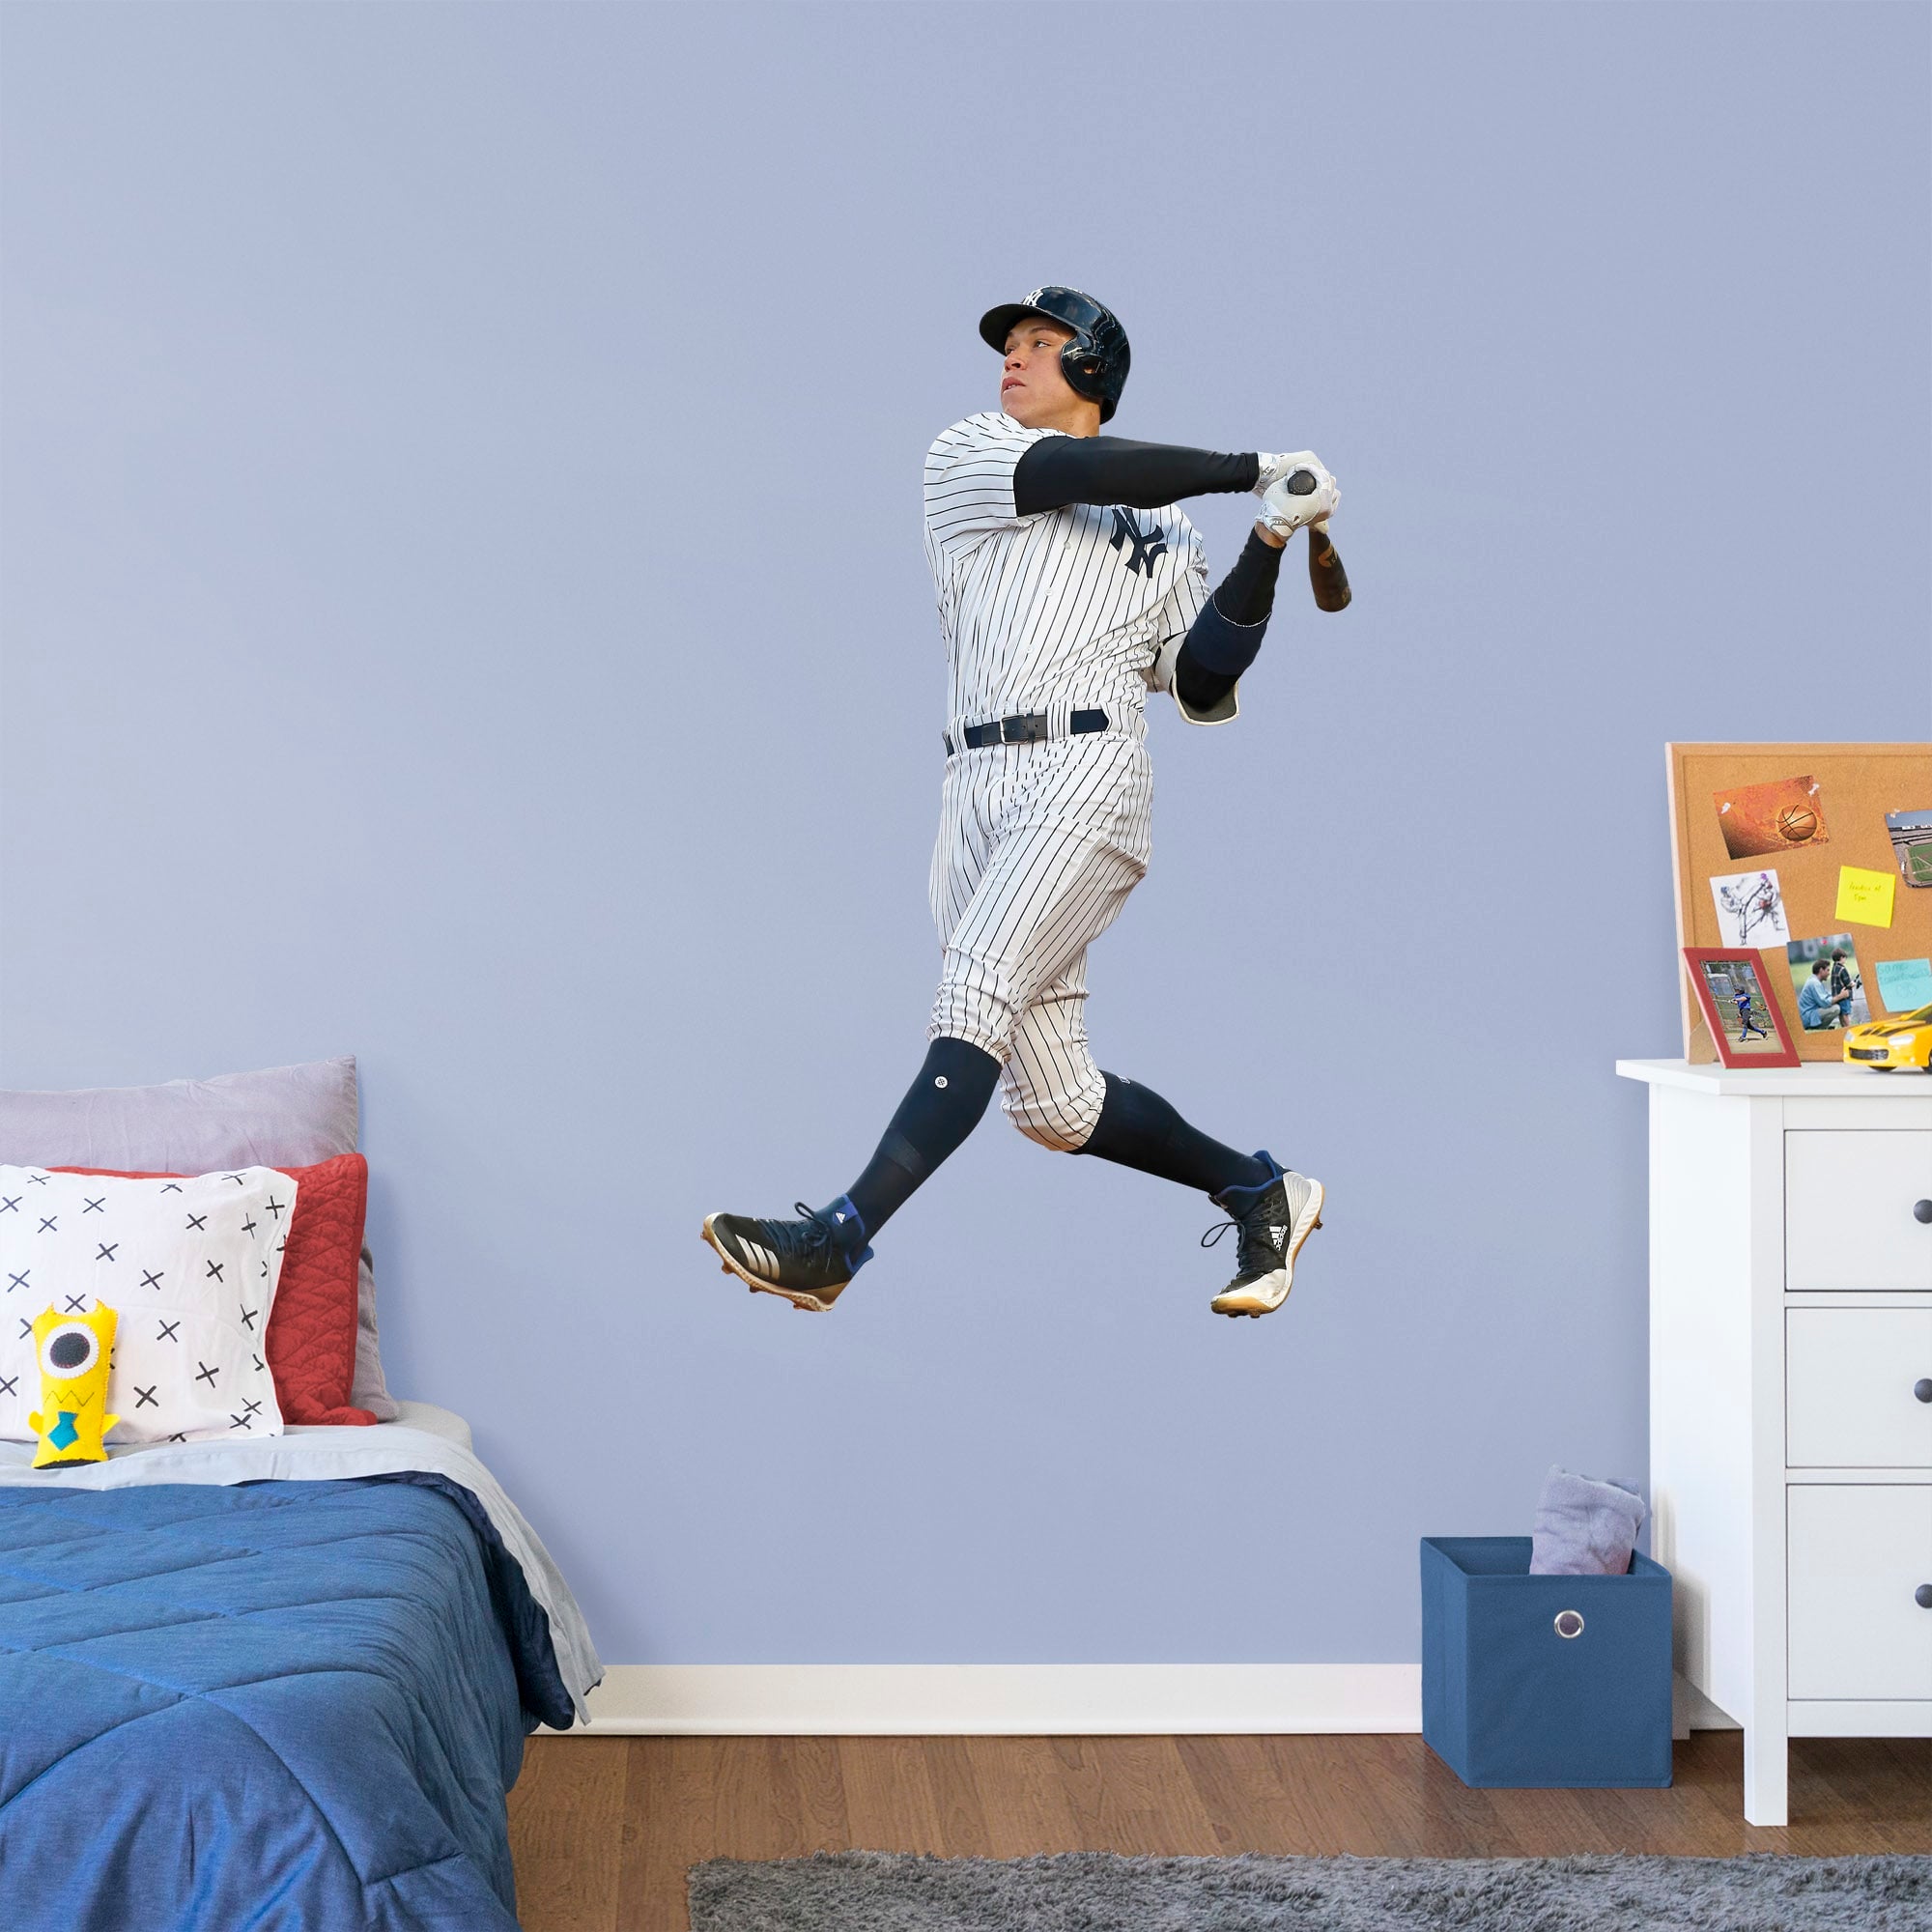 Aaron Judge for New York Yankees: Swing - Officially Licensed MLB Removable Wall Decal Giant Athlete + 2 Decals (33"W x 51"H) by